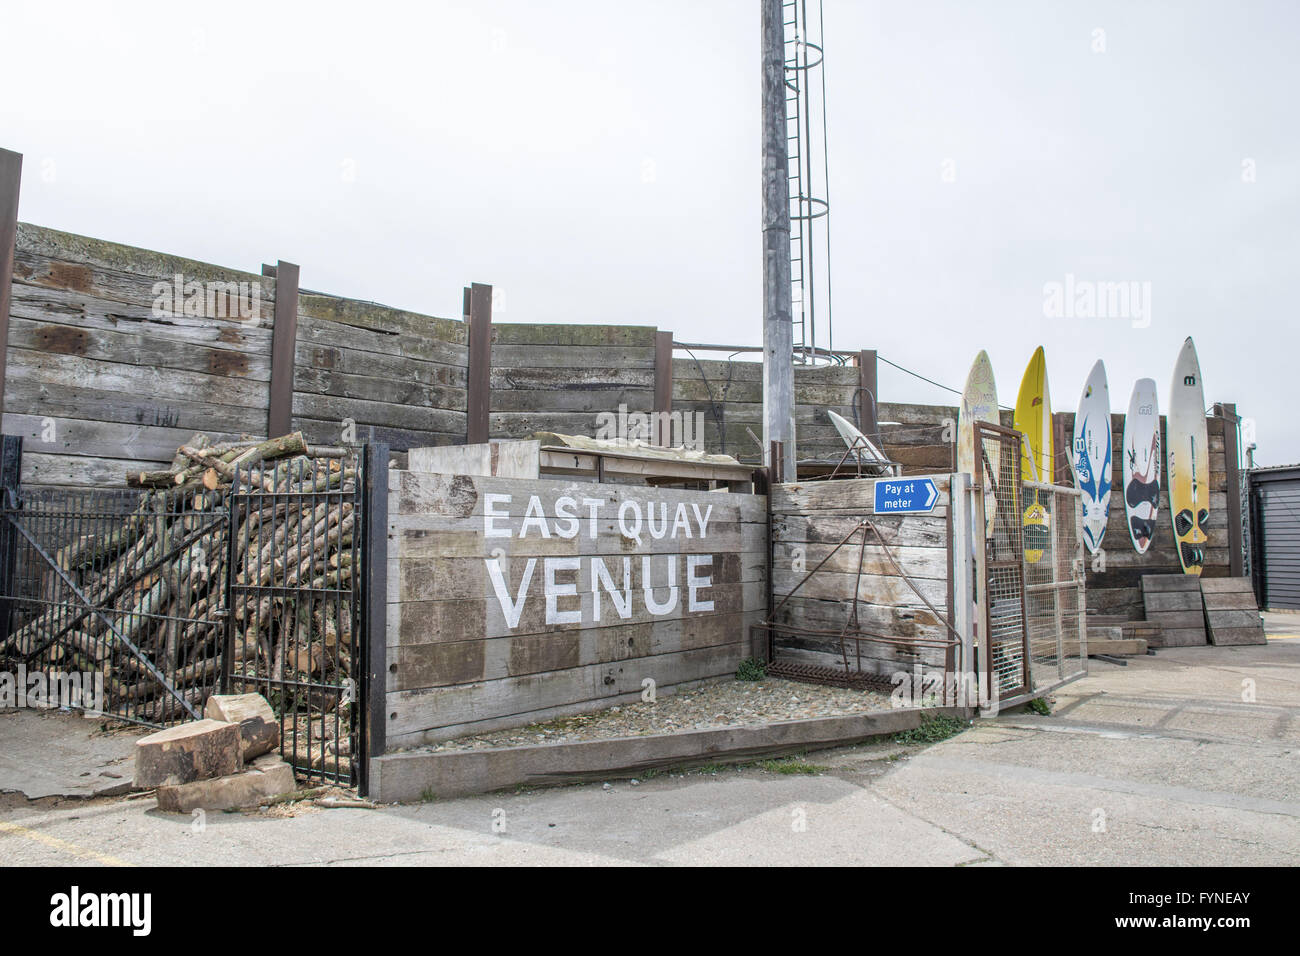 East Quay Venue Whistable harbor Stock Photo